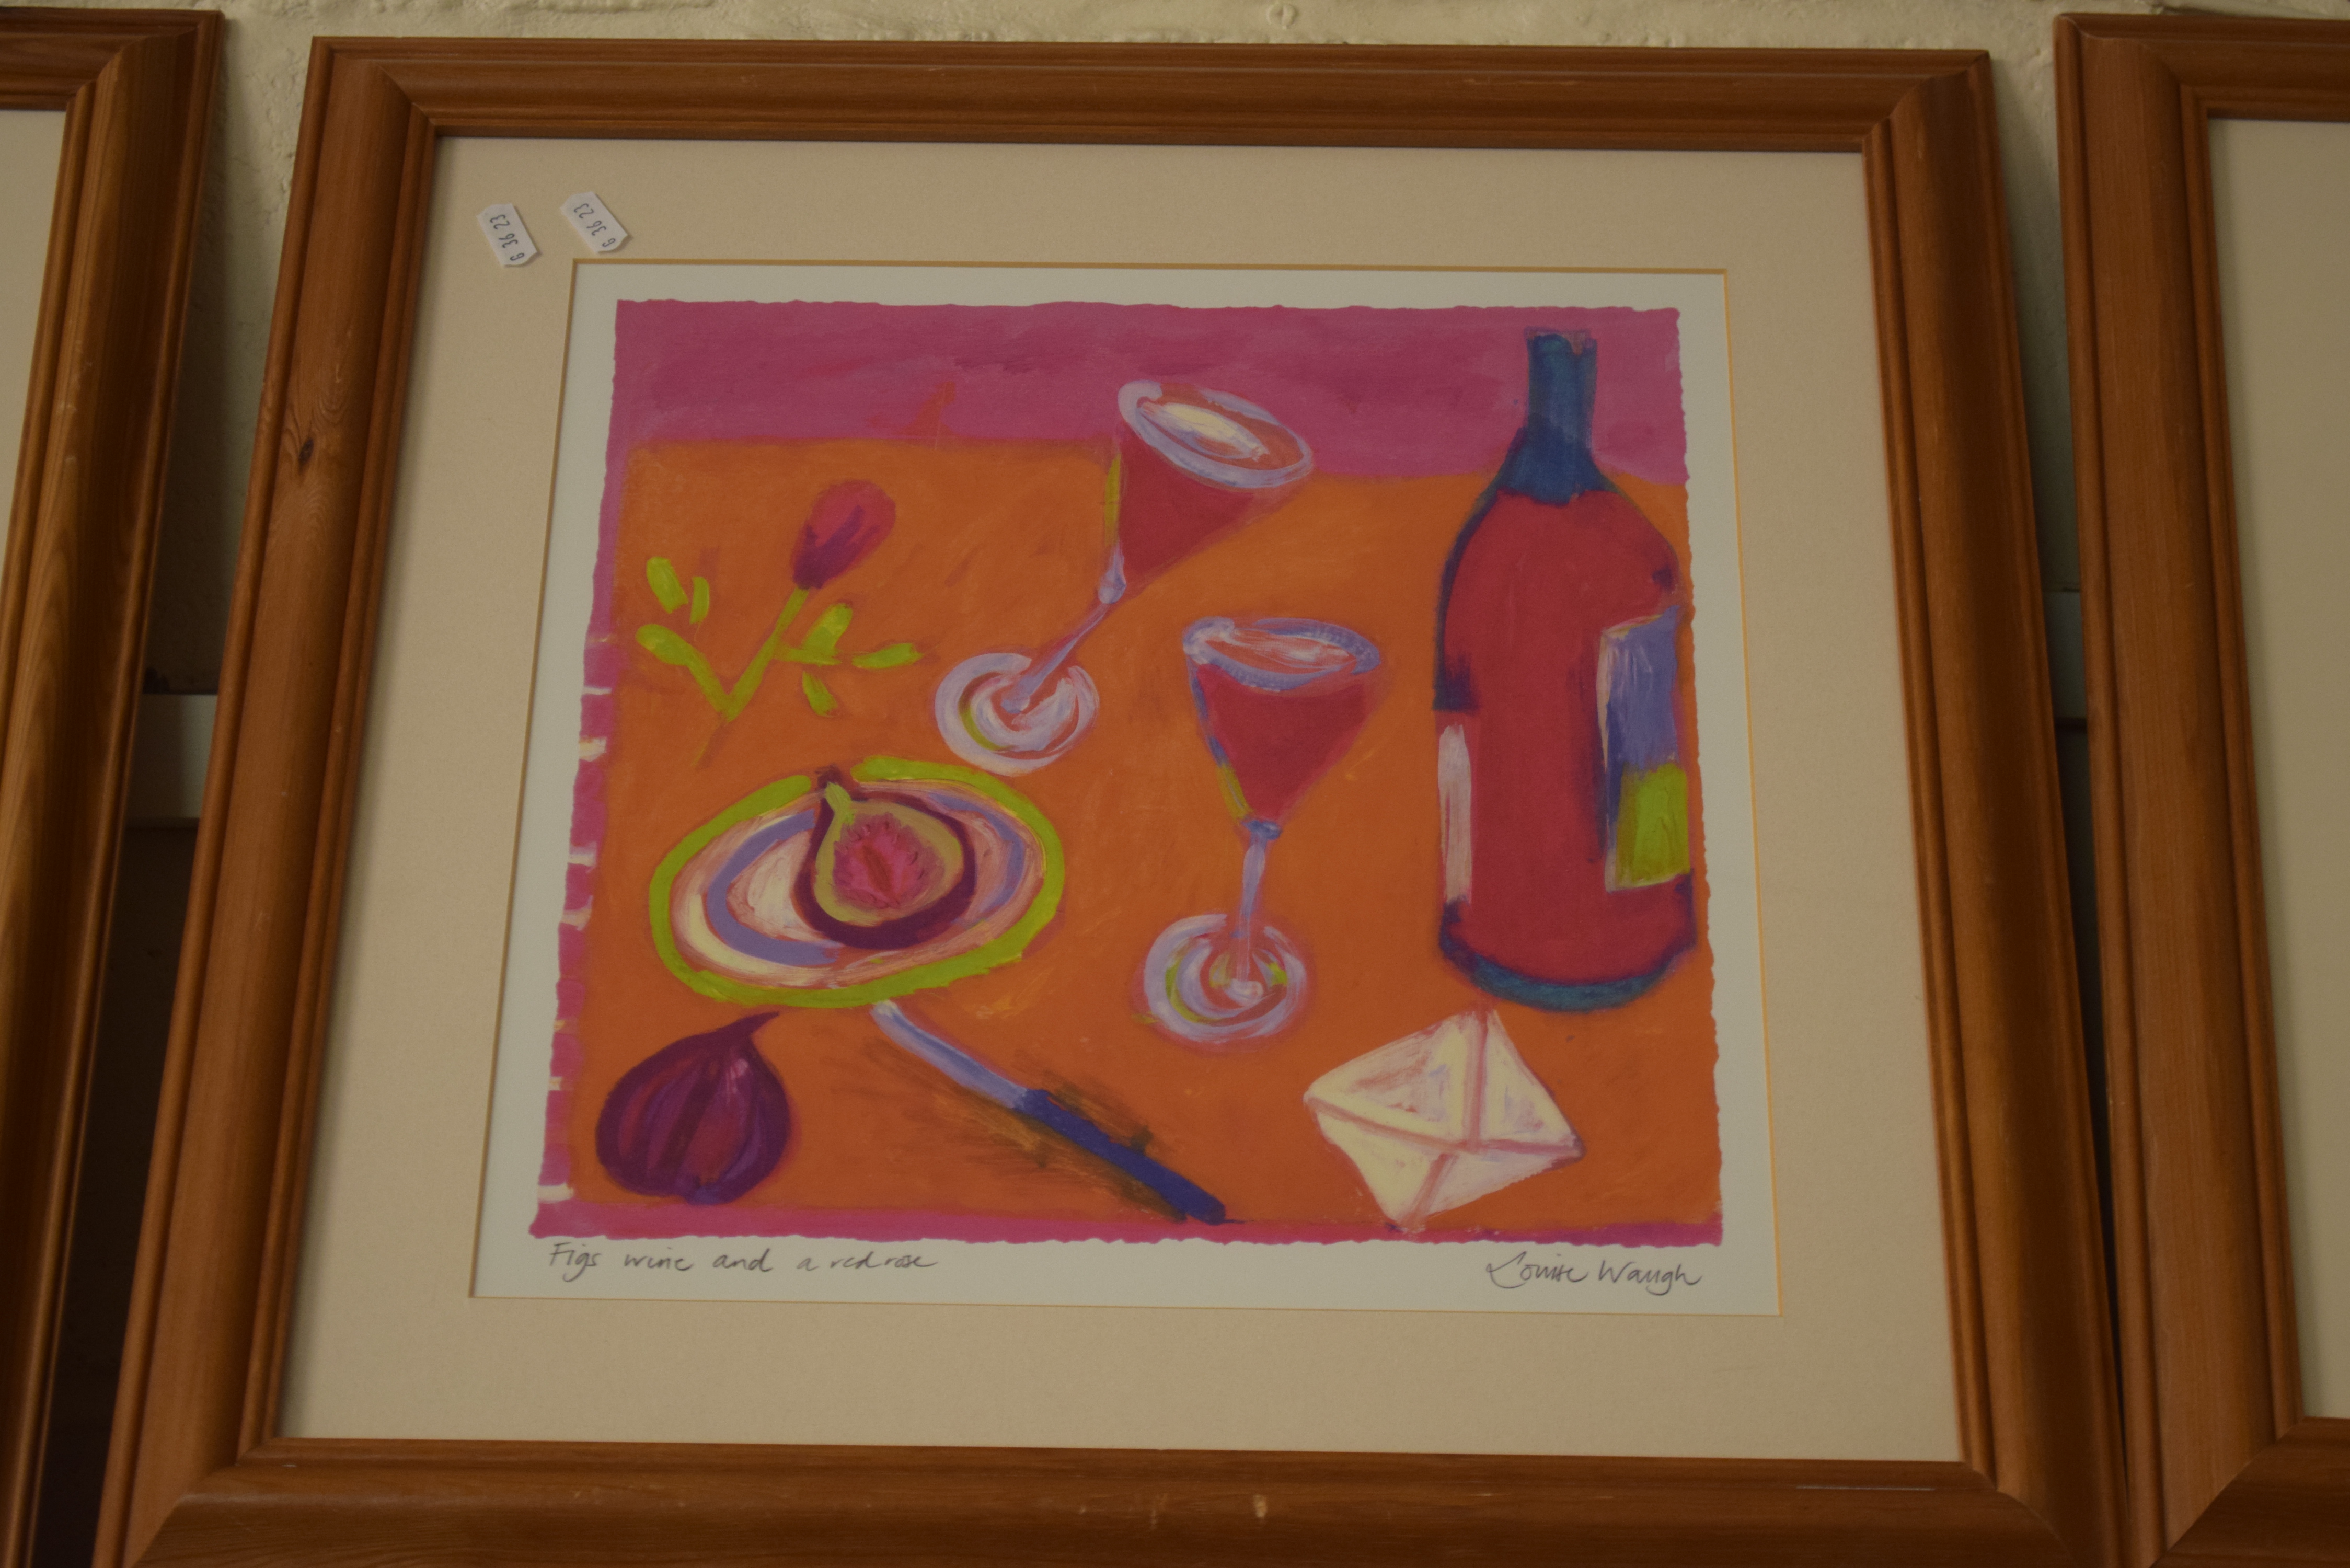 LOUISE WAUGH, THREE COLOURED PRINTS "THE BLUE TABLE", "STILL LIFE WITH OLIVES" AND "FIGS, WINE AND A - Image 2 of 3